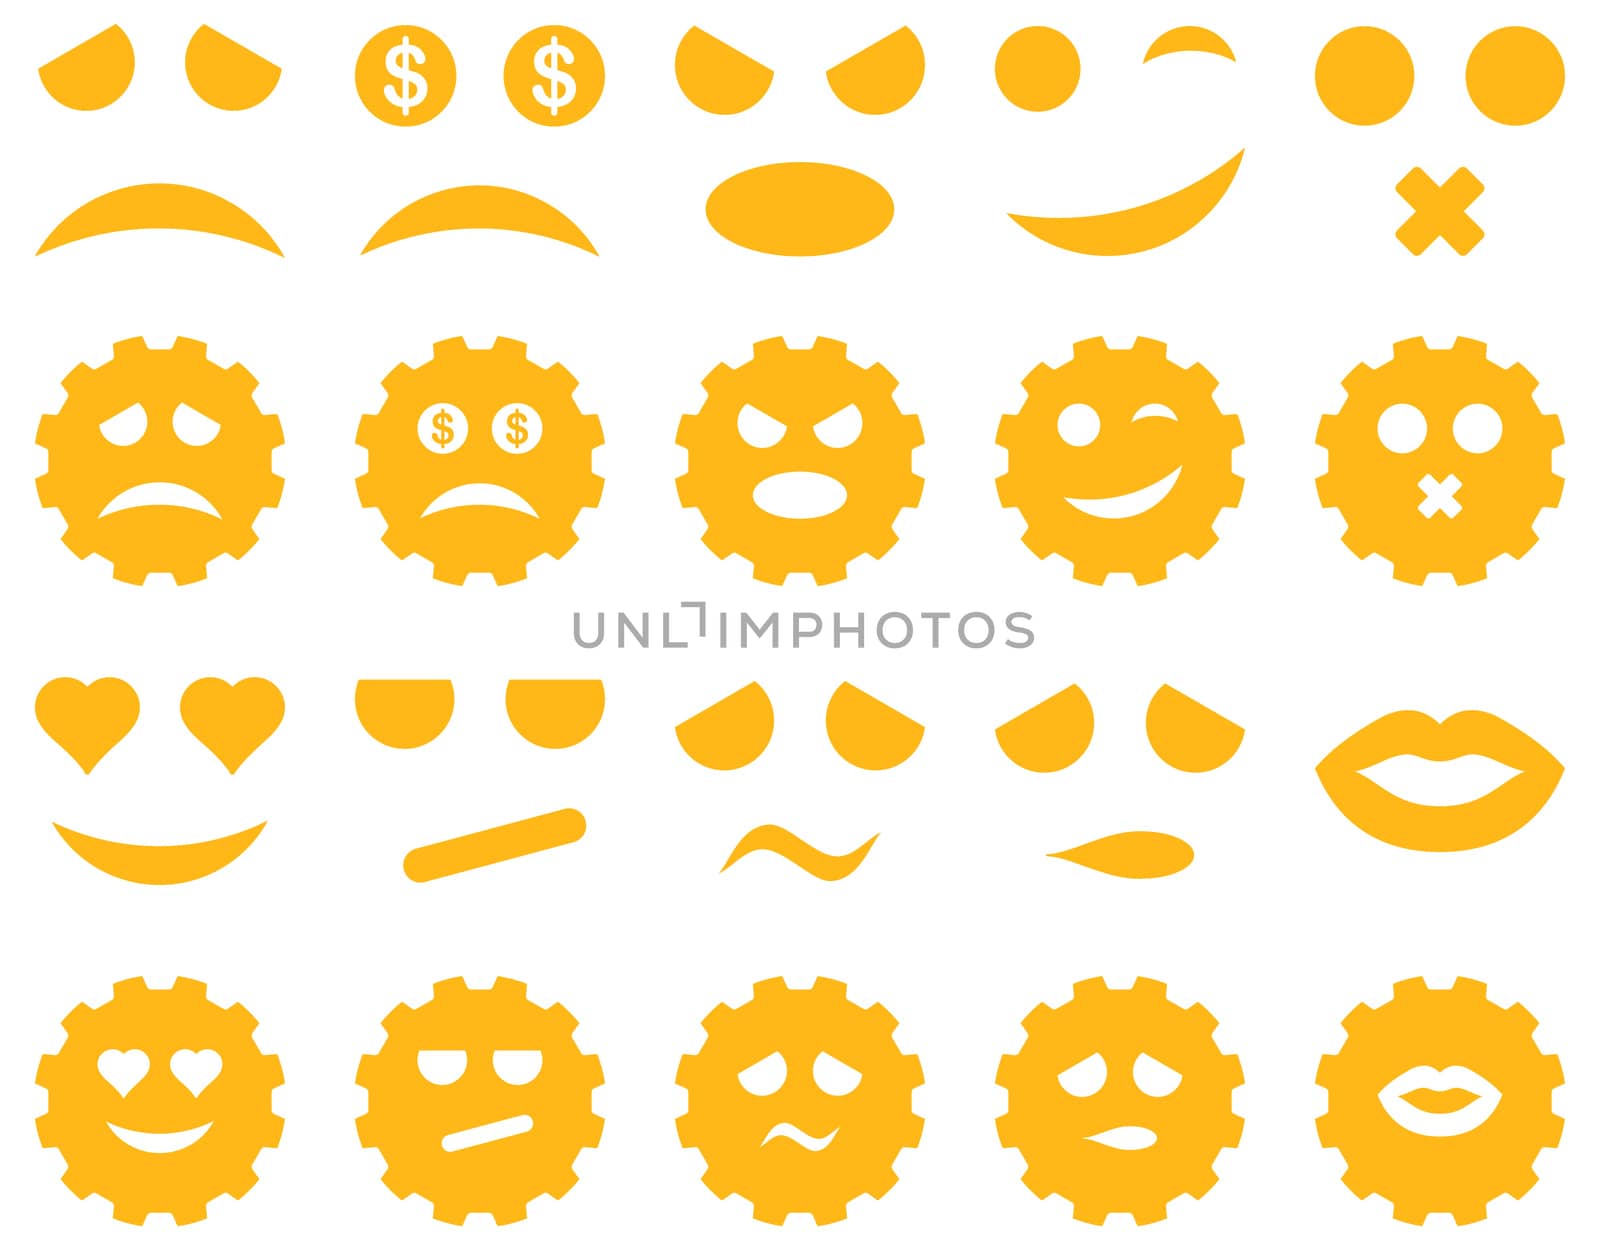 Tool, gear, smile, emotion icons. Glyph set style is flat images, yellow symbols, isolated on a white background.